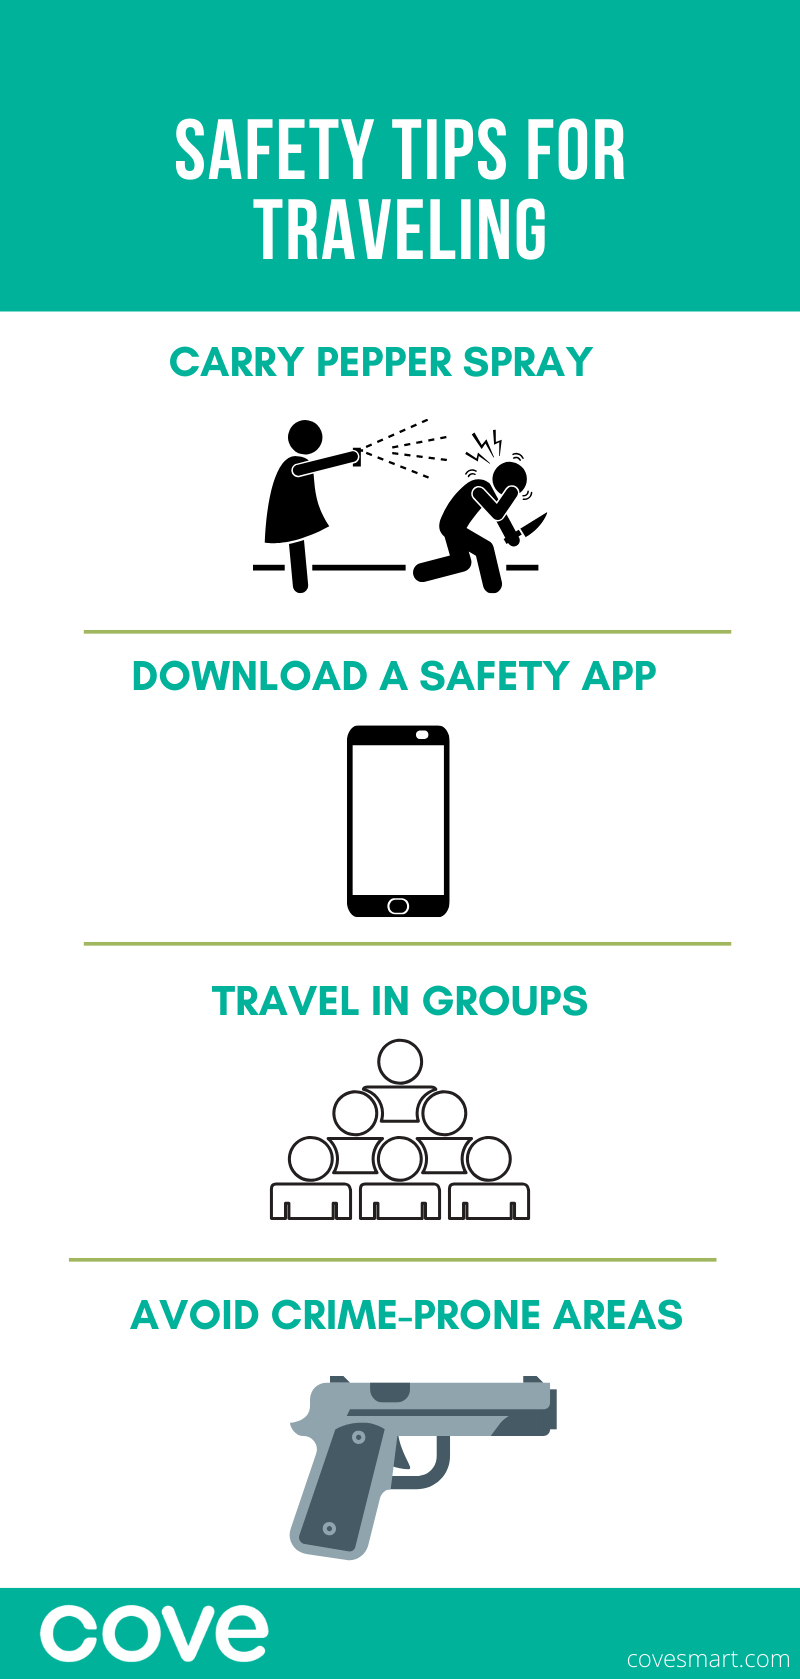 Safety Tips for Traveling Infographic. Carry pepper spray, download safety app, travel in groups, & avoid crime-prone areas.